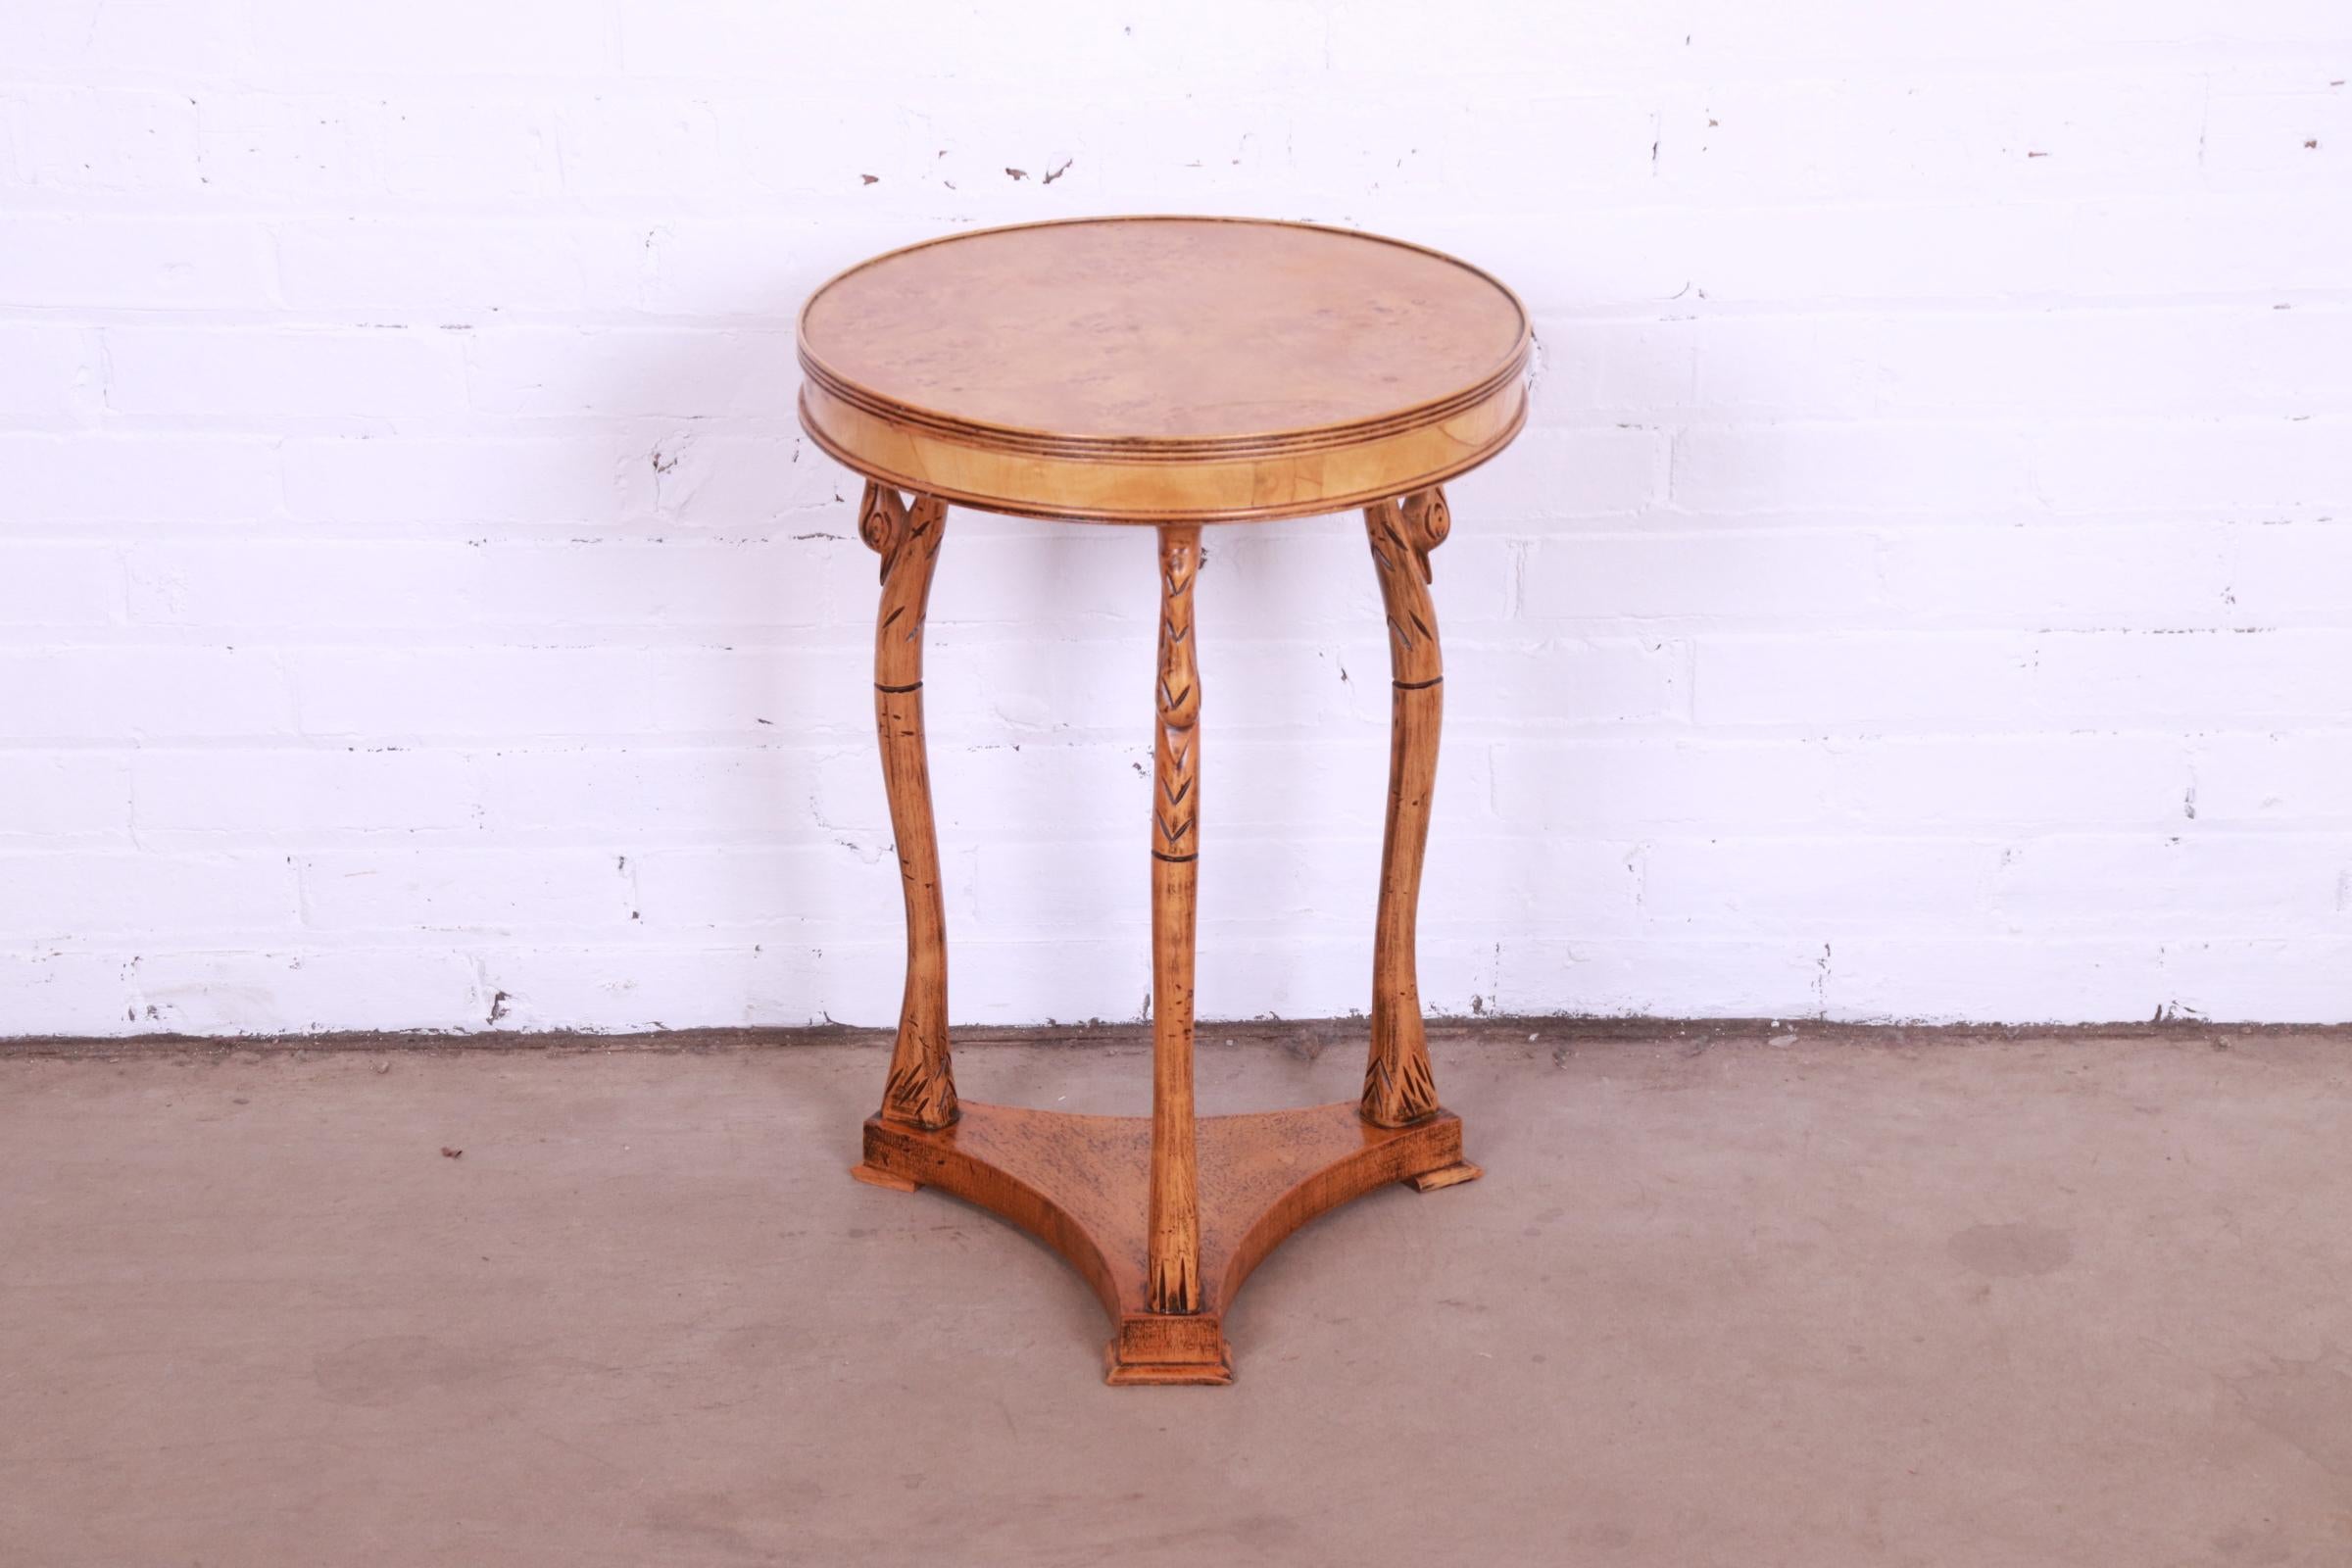 A gorgeous Empire style occasional side table or tea table

Italy, 20th century

Carved maple base in swan motif, with burl wood top.

Measures: 16